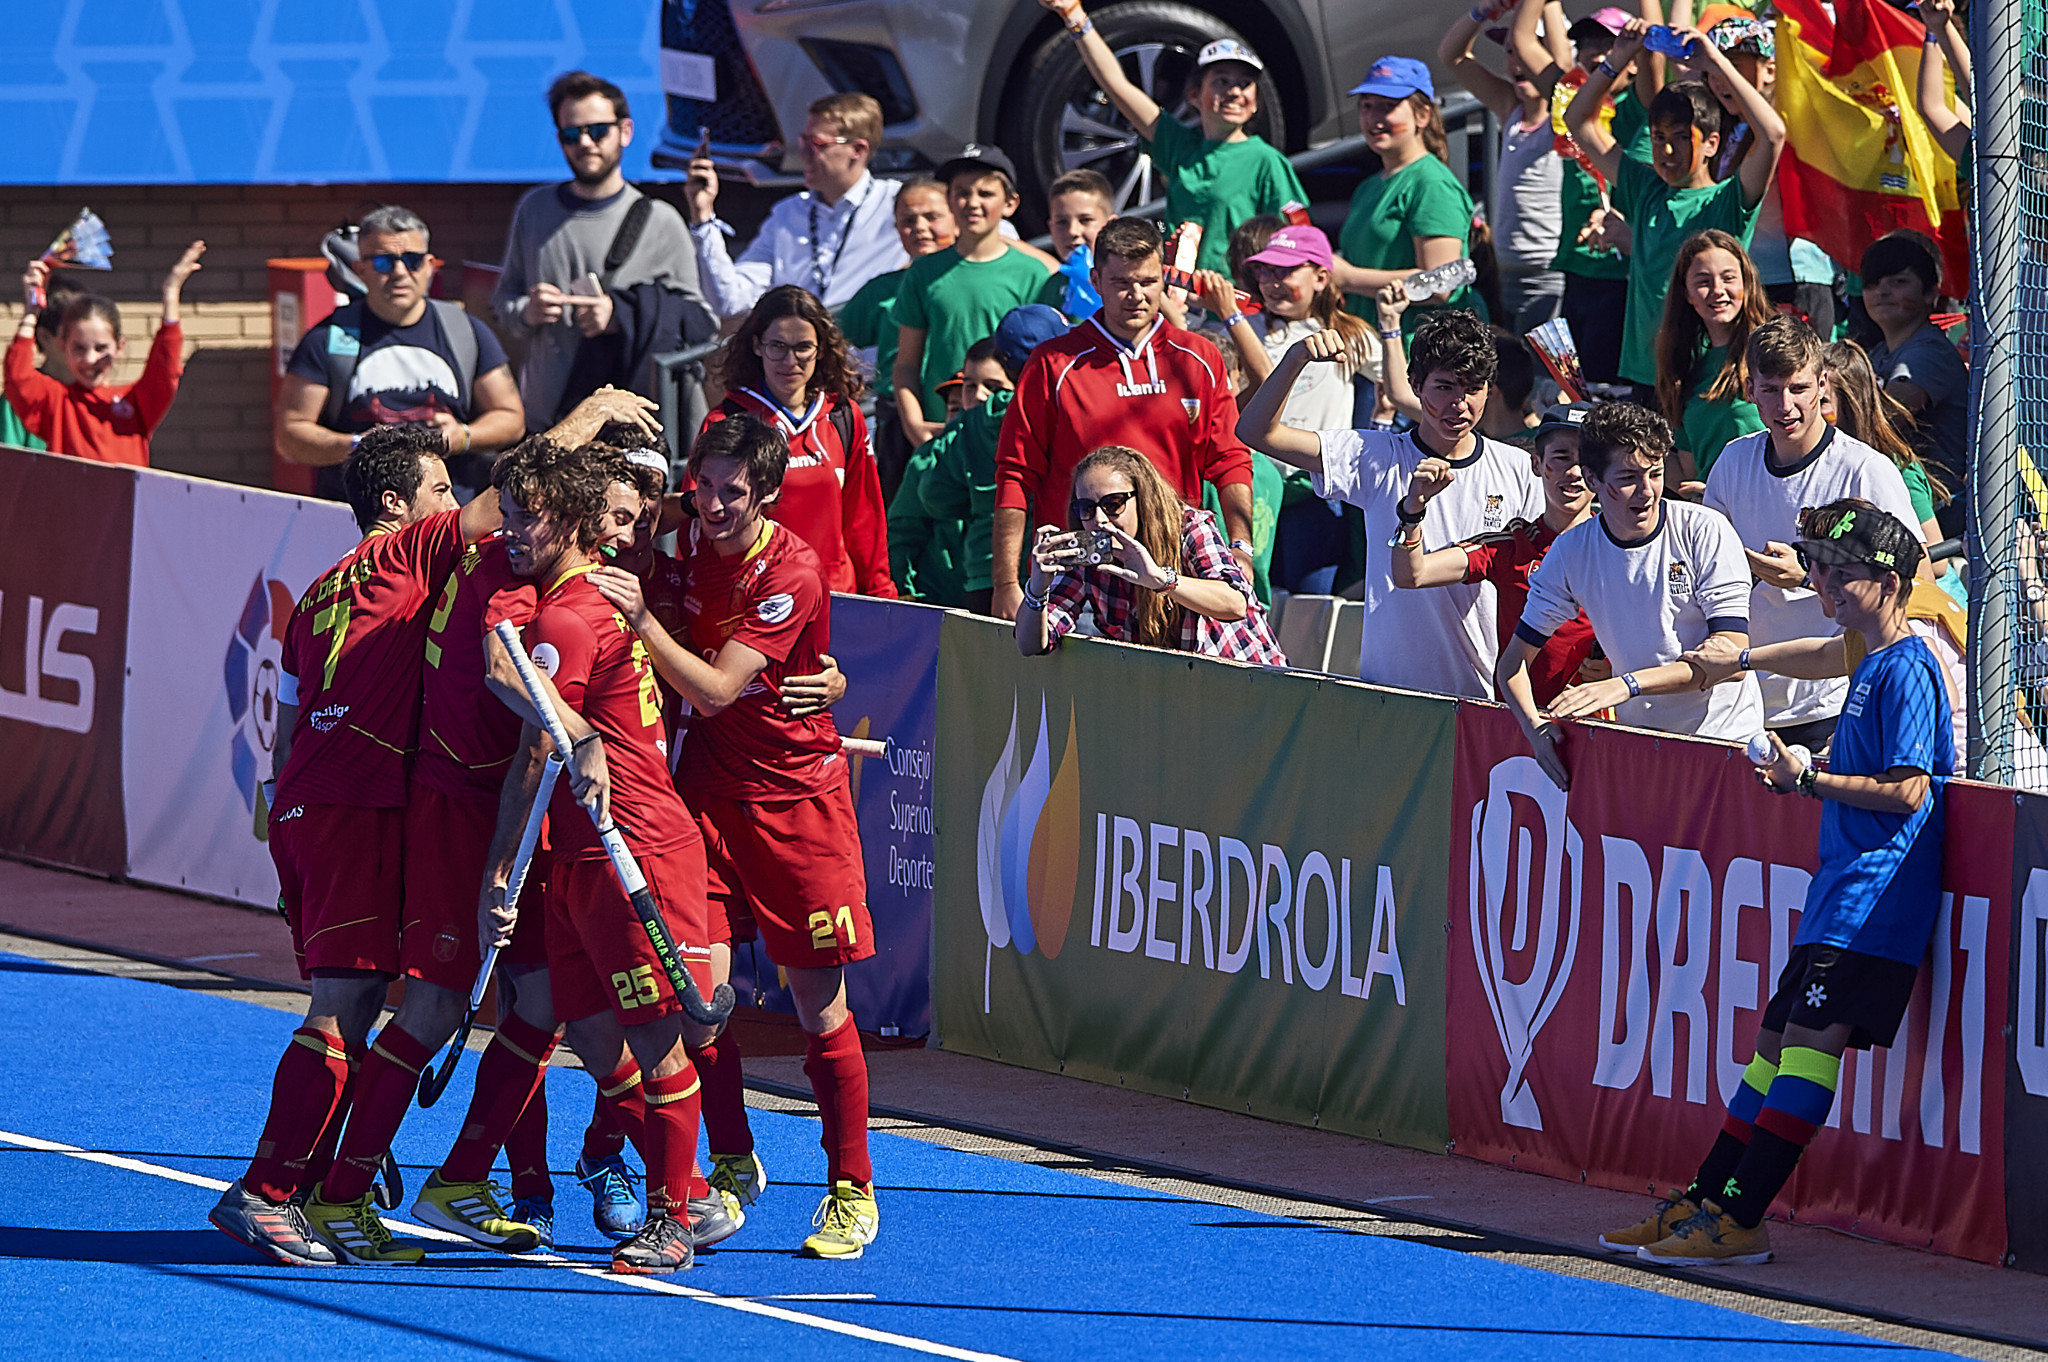 Spain defeated Germany on penalties in a Men's International Hockey Federation Pro League clash today to continue their remarkable shoot-out record ©Getty Images